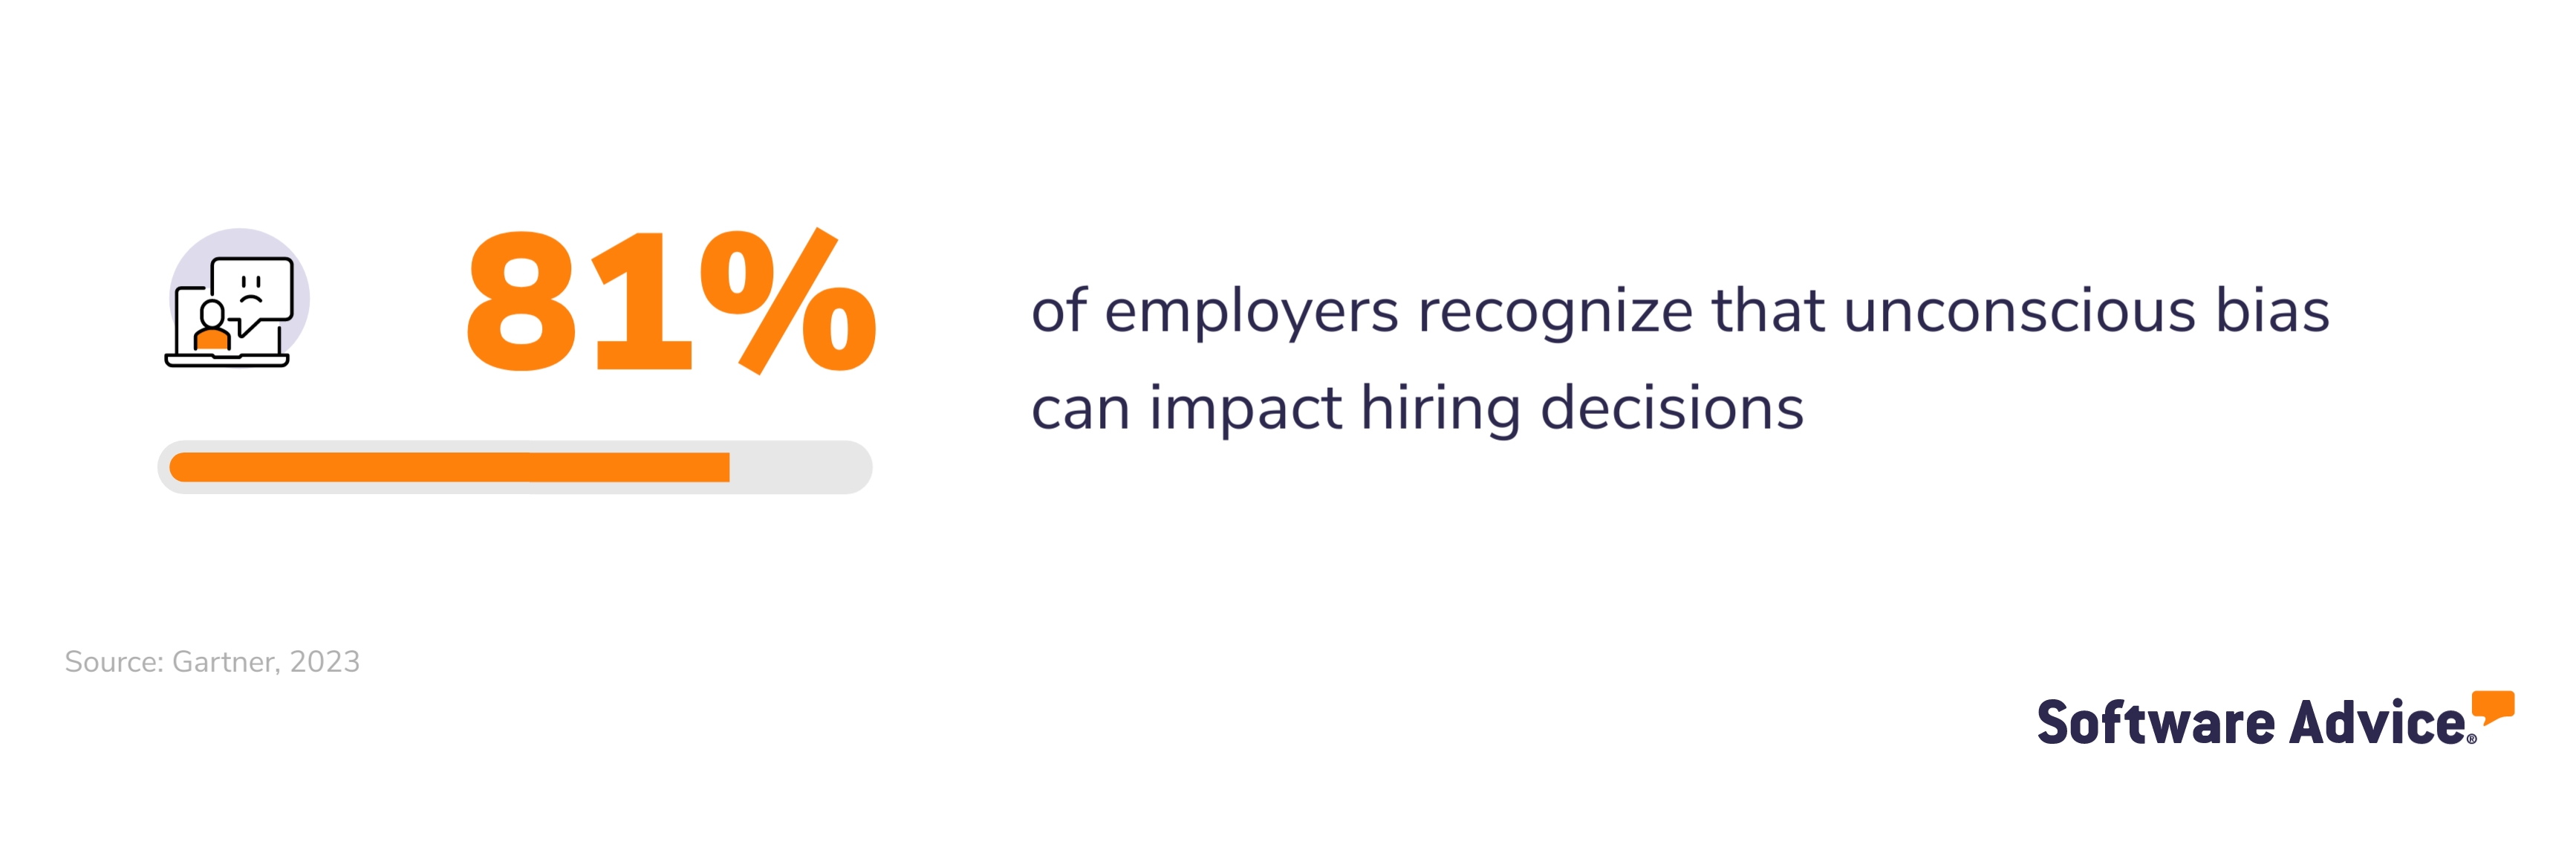 81% of employees recognize that unconscious bias can impact hiring decisions. 